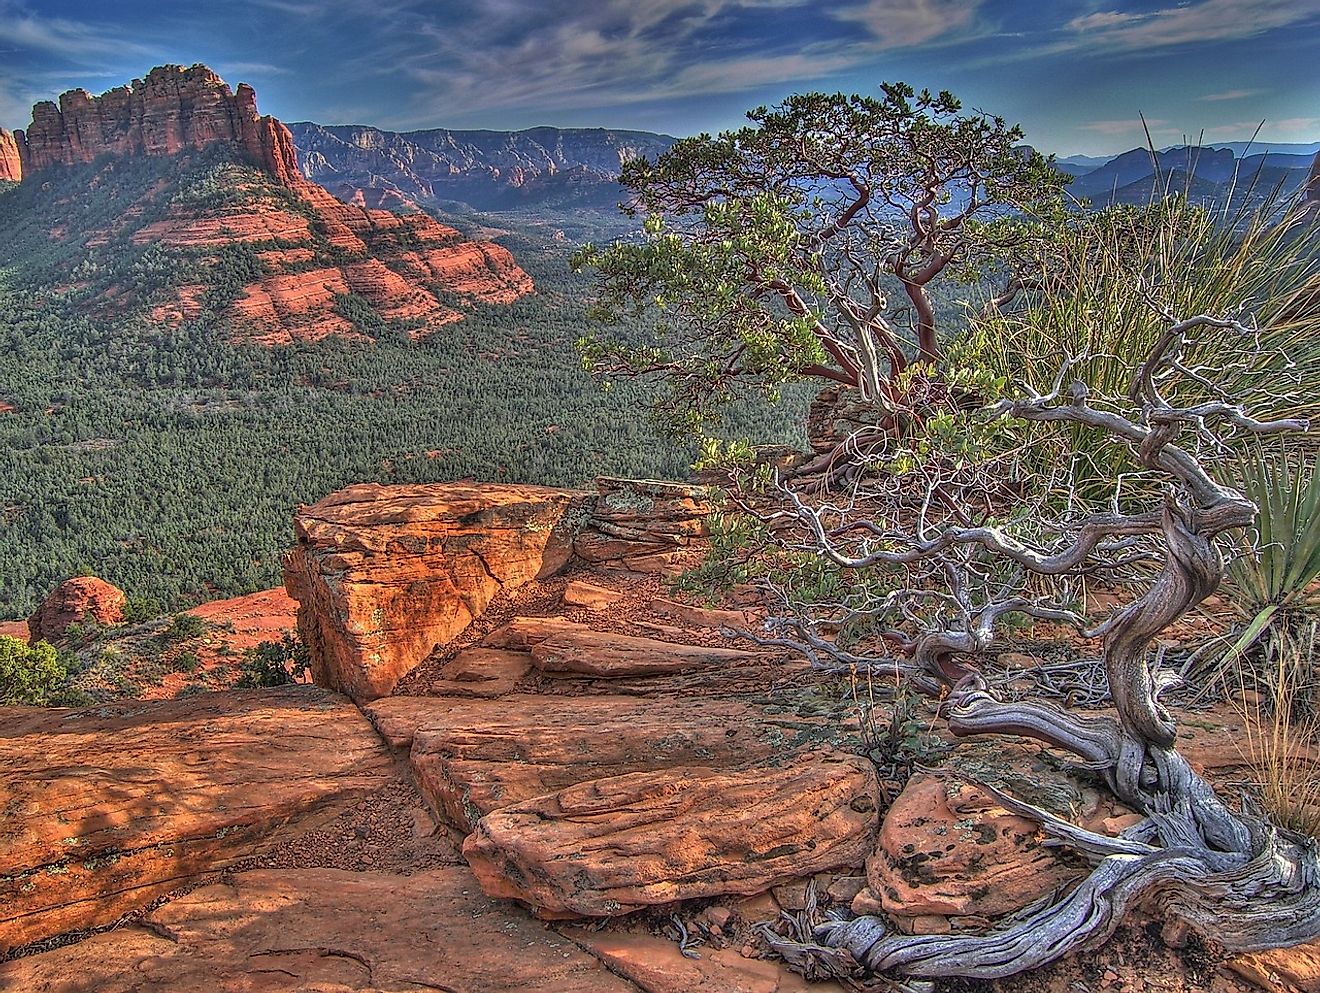 The spectacular scenery of Sedona. Image credit: Skeeze from Pixabay 